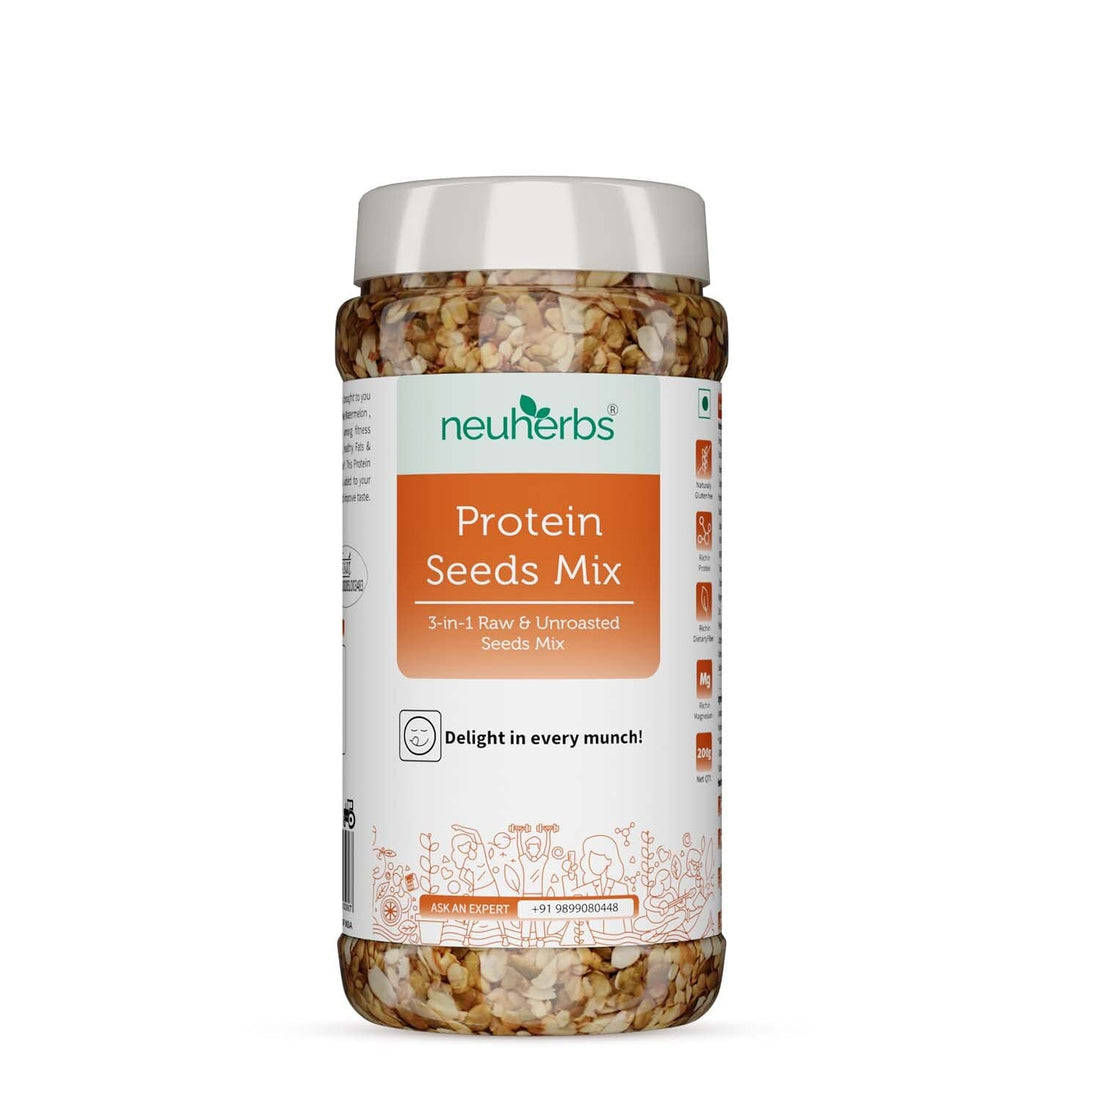 neuherbs 3-in-1 Raw & Unroasted Protein Seeds Mix